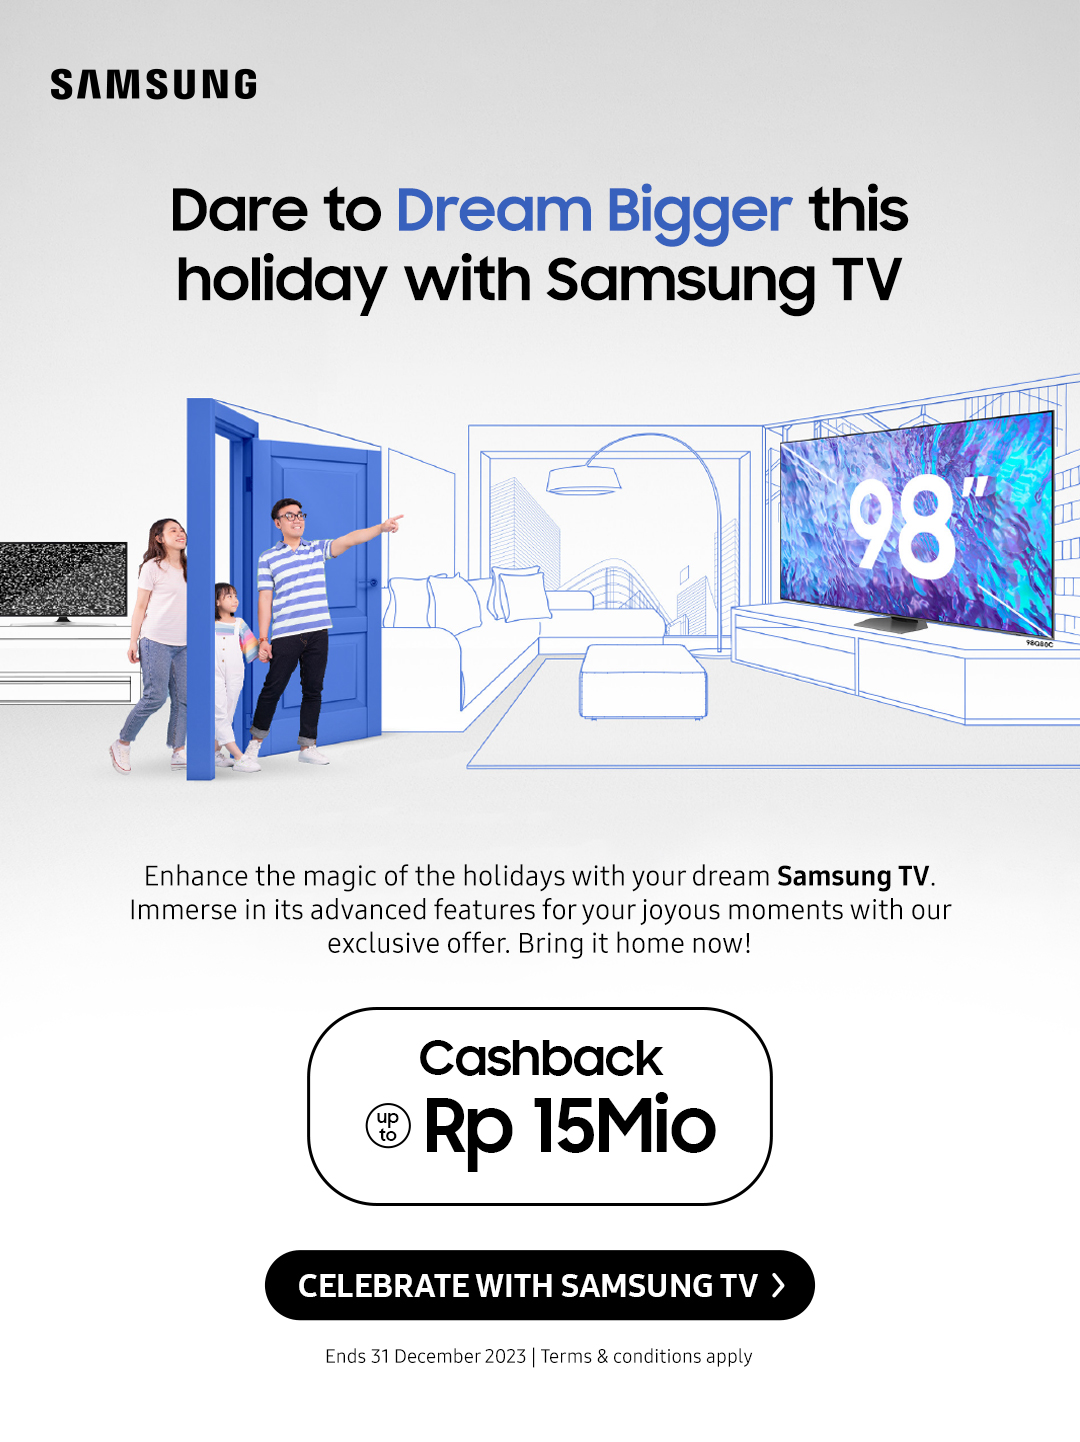 Dare to Dream Bigger this holiday with Samsung TV | Enhance the magic of the holidays with your dream Samsung TV. Immerse in its advanced features for your joyous moments with our exclusive offer. Bring it home now! 